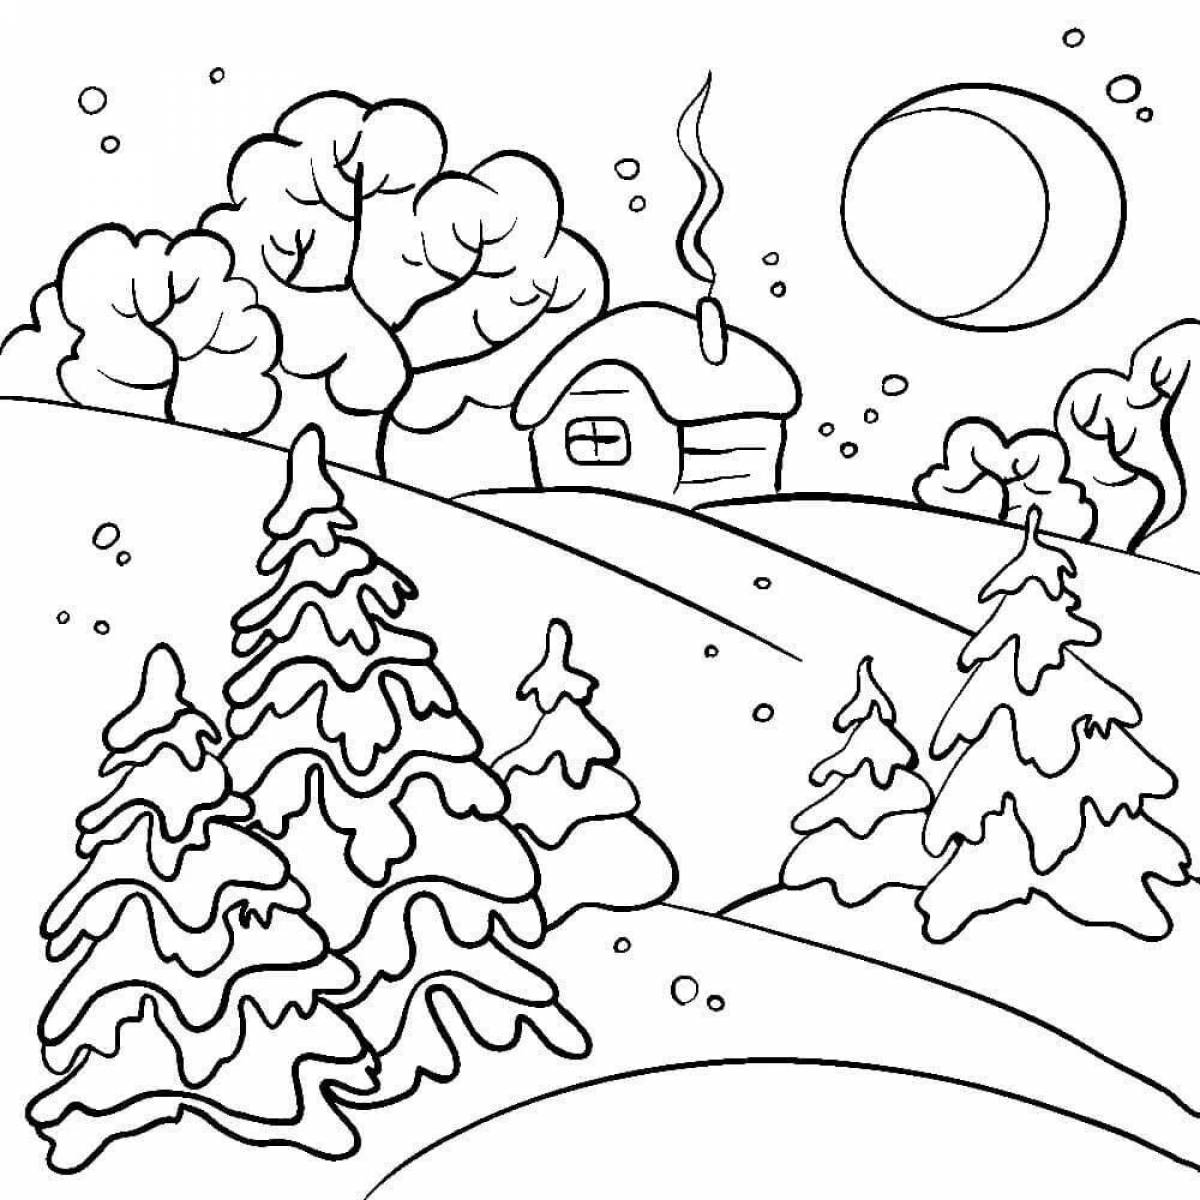 Nature in winter for kids #3